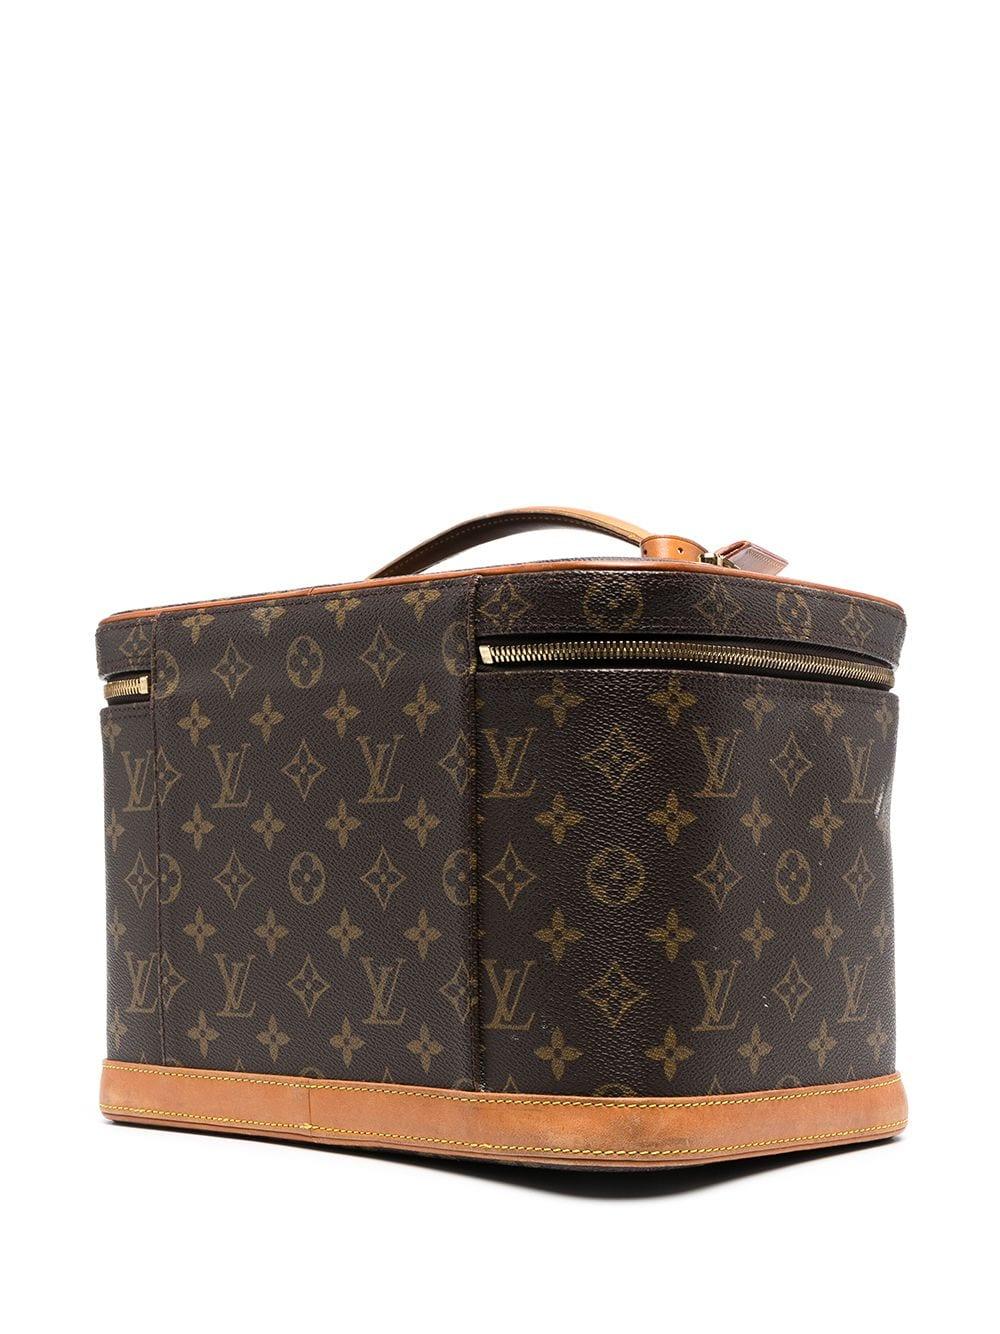 Store your beauty essentials in style with this vanity case. Crafted in classic Louis Vuitton beige & brown monogram canvas, featuring a structured design and leather trim.

Colour: Brown/ Beige

Composition: Leather

Condition: Good vintage